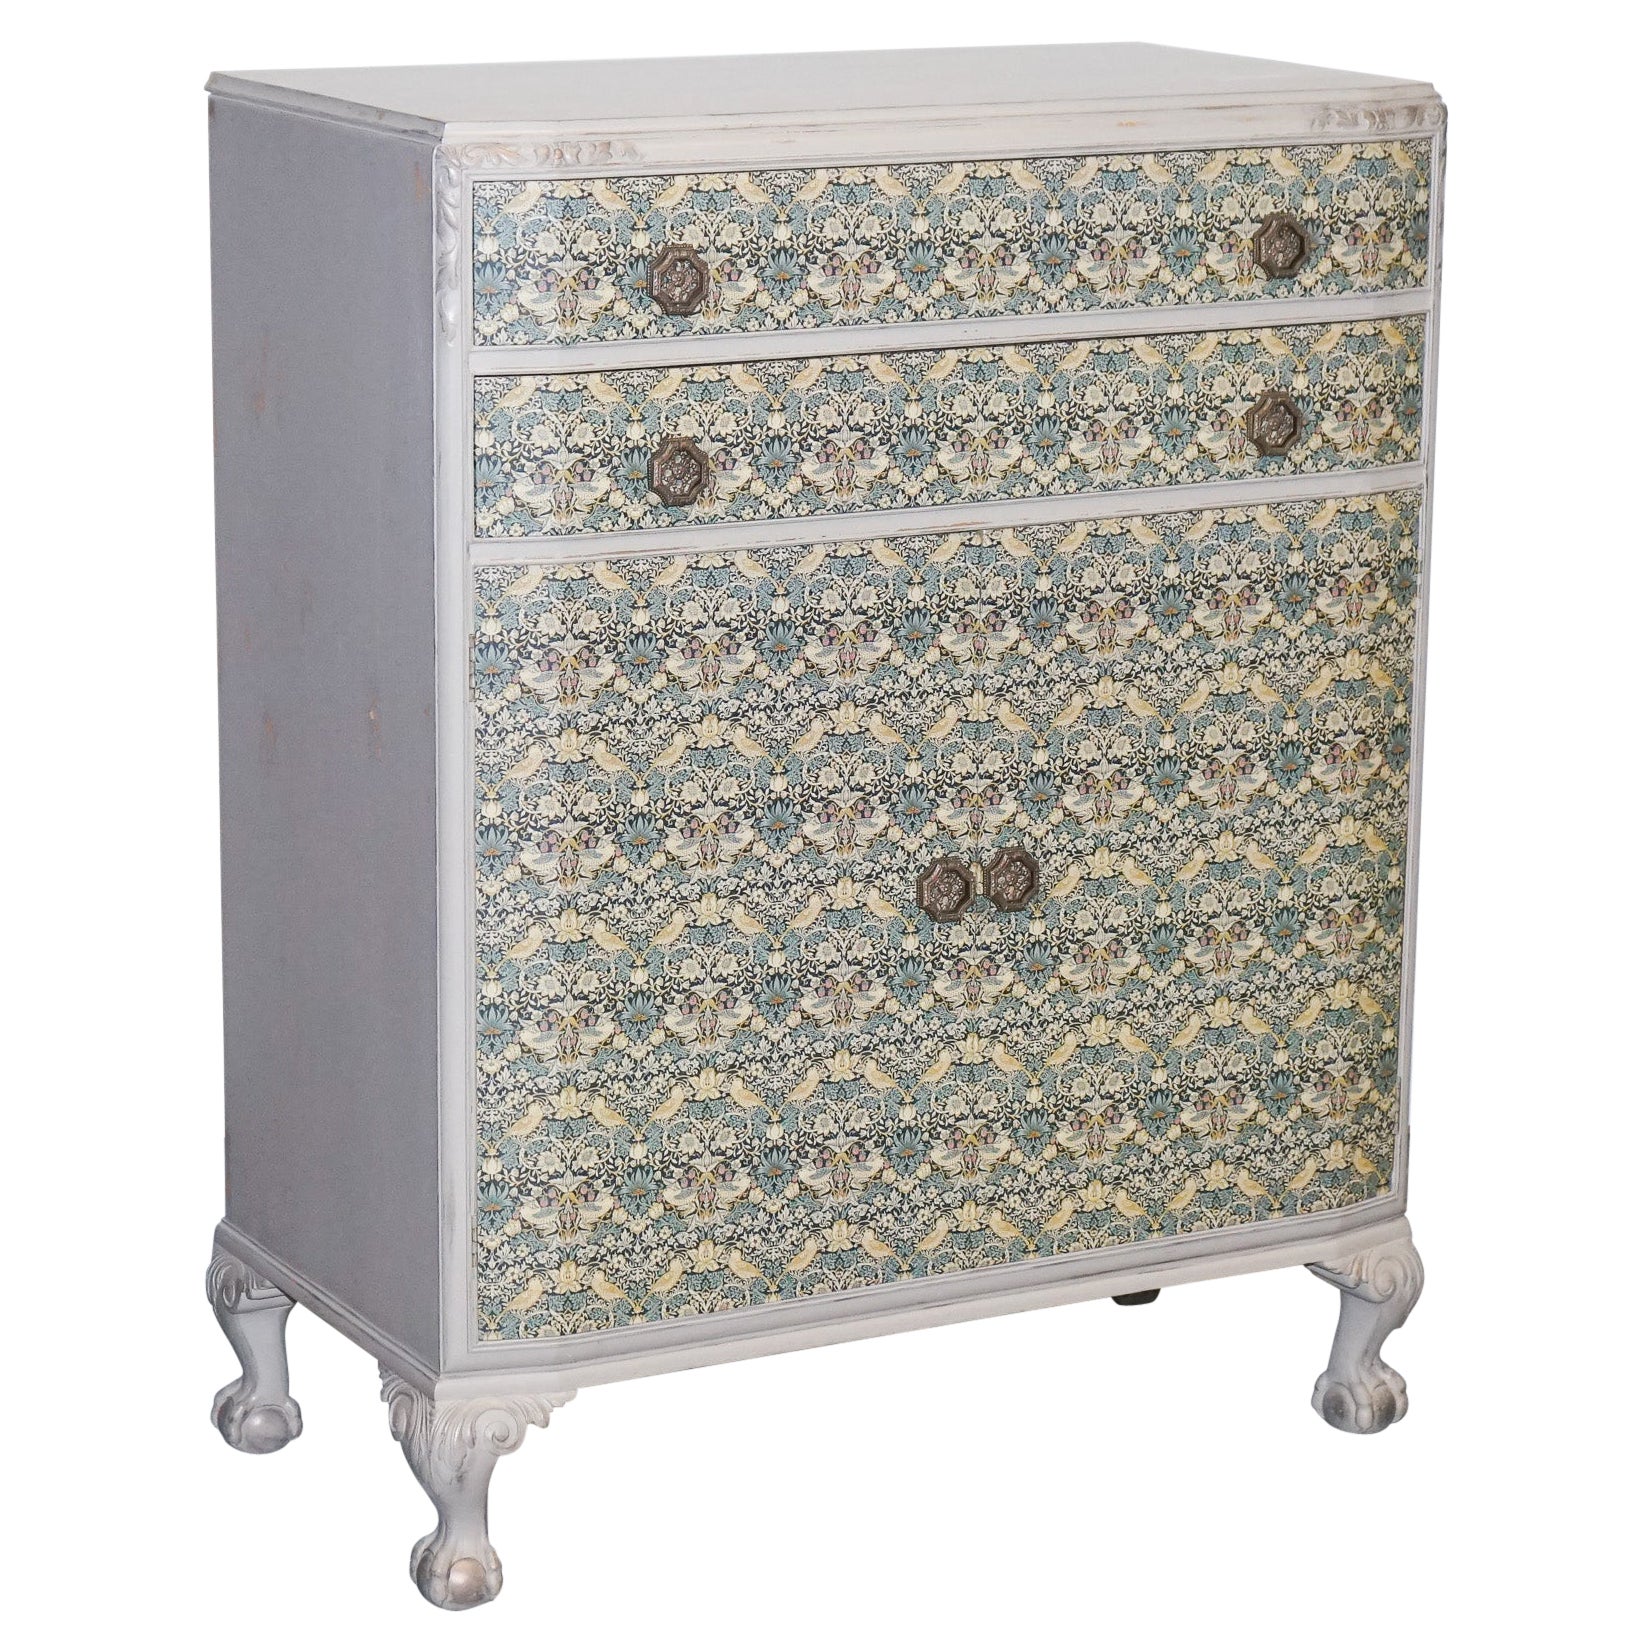 1930s Waring & Gillow Hand Painted Chest of Drawers Cupboard William Morris For Sale